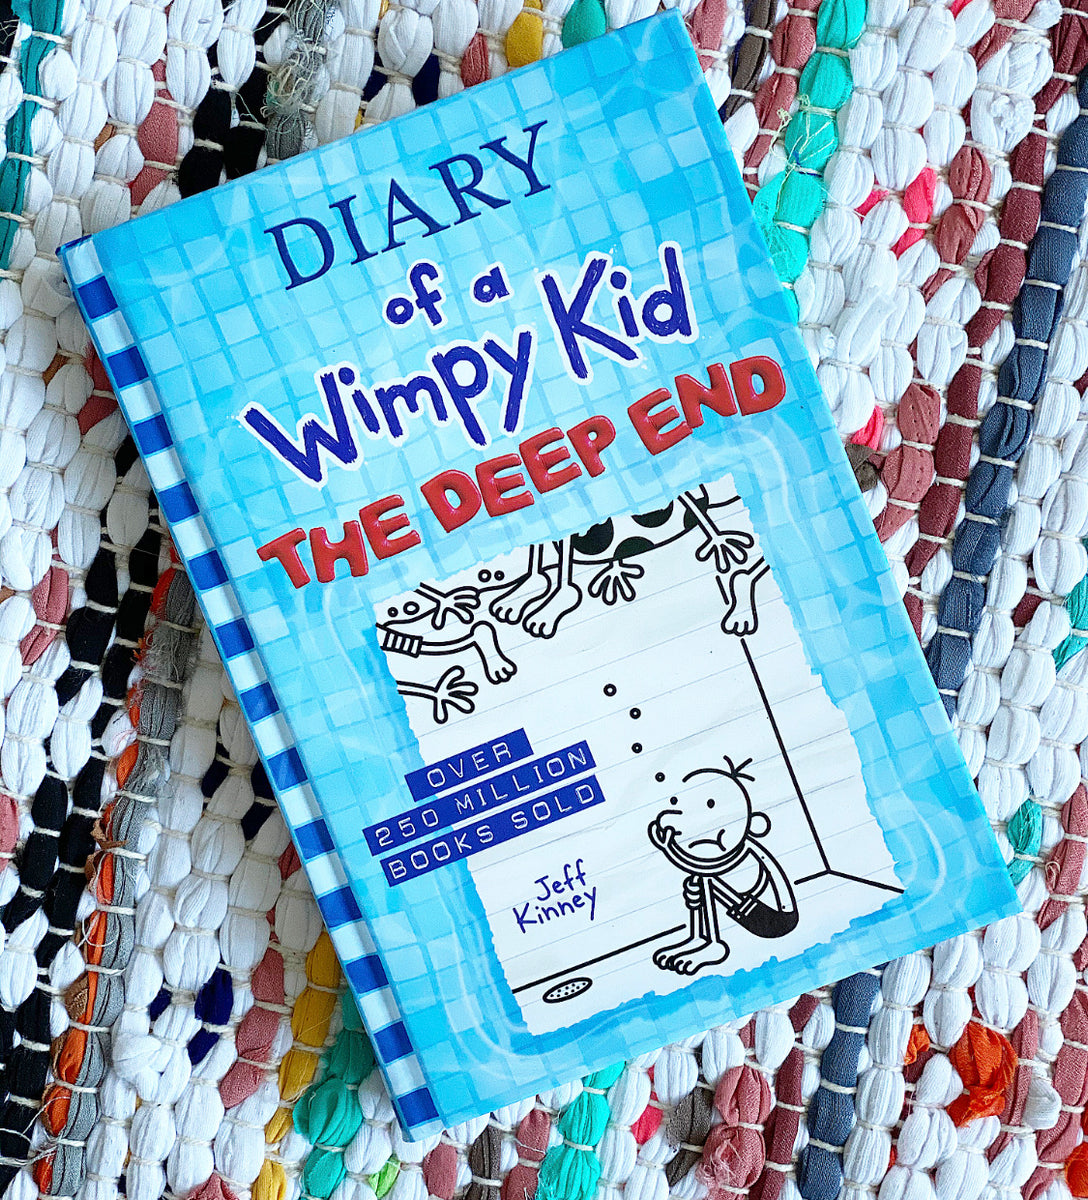 Kid　–　Jeff　Kind　Bookshop　End　Kinney　(Diary　a　#15)　of　Wimpy　Deep　The　Brave